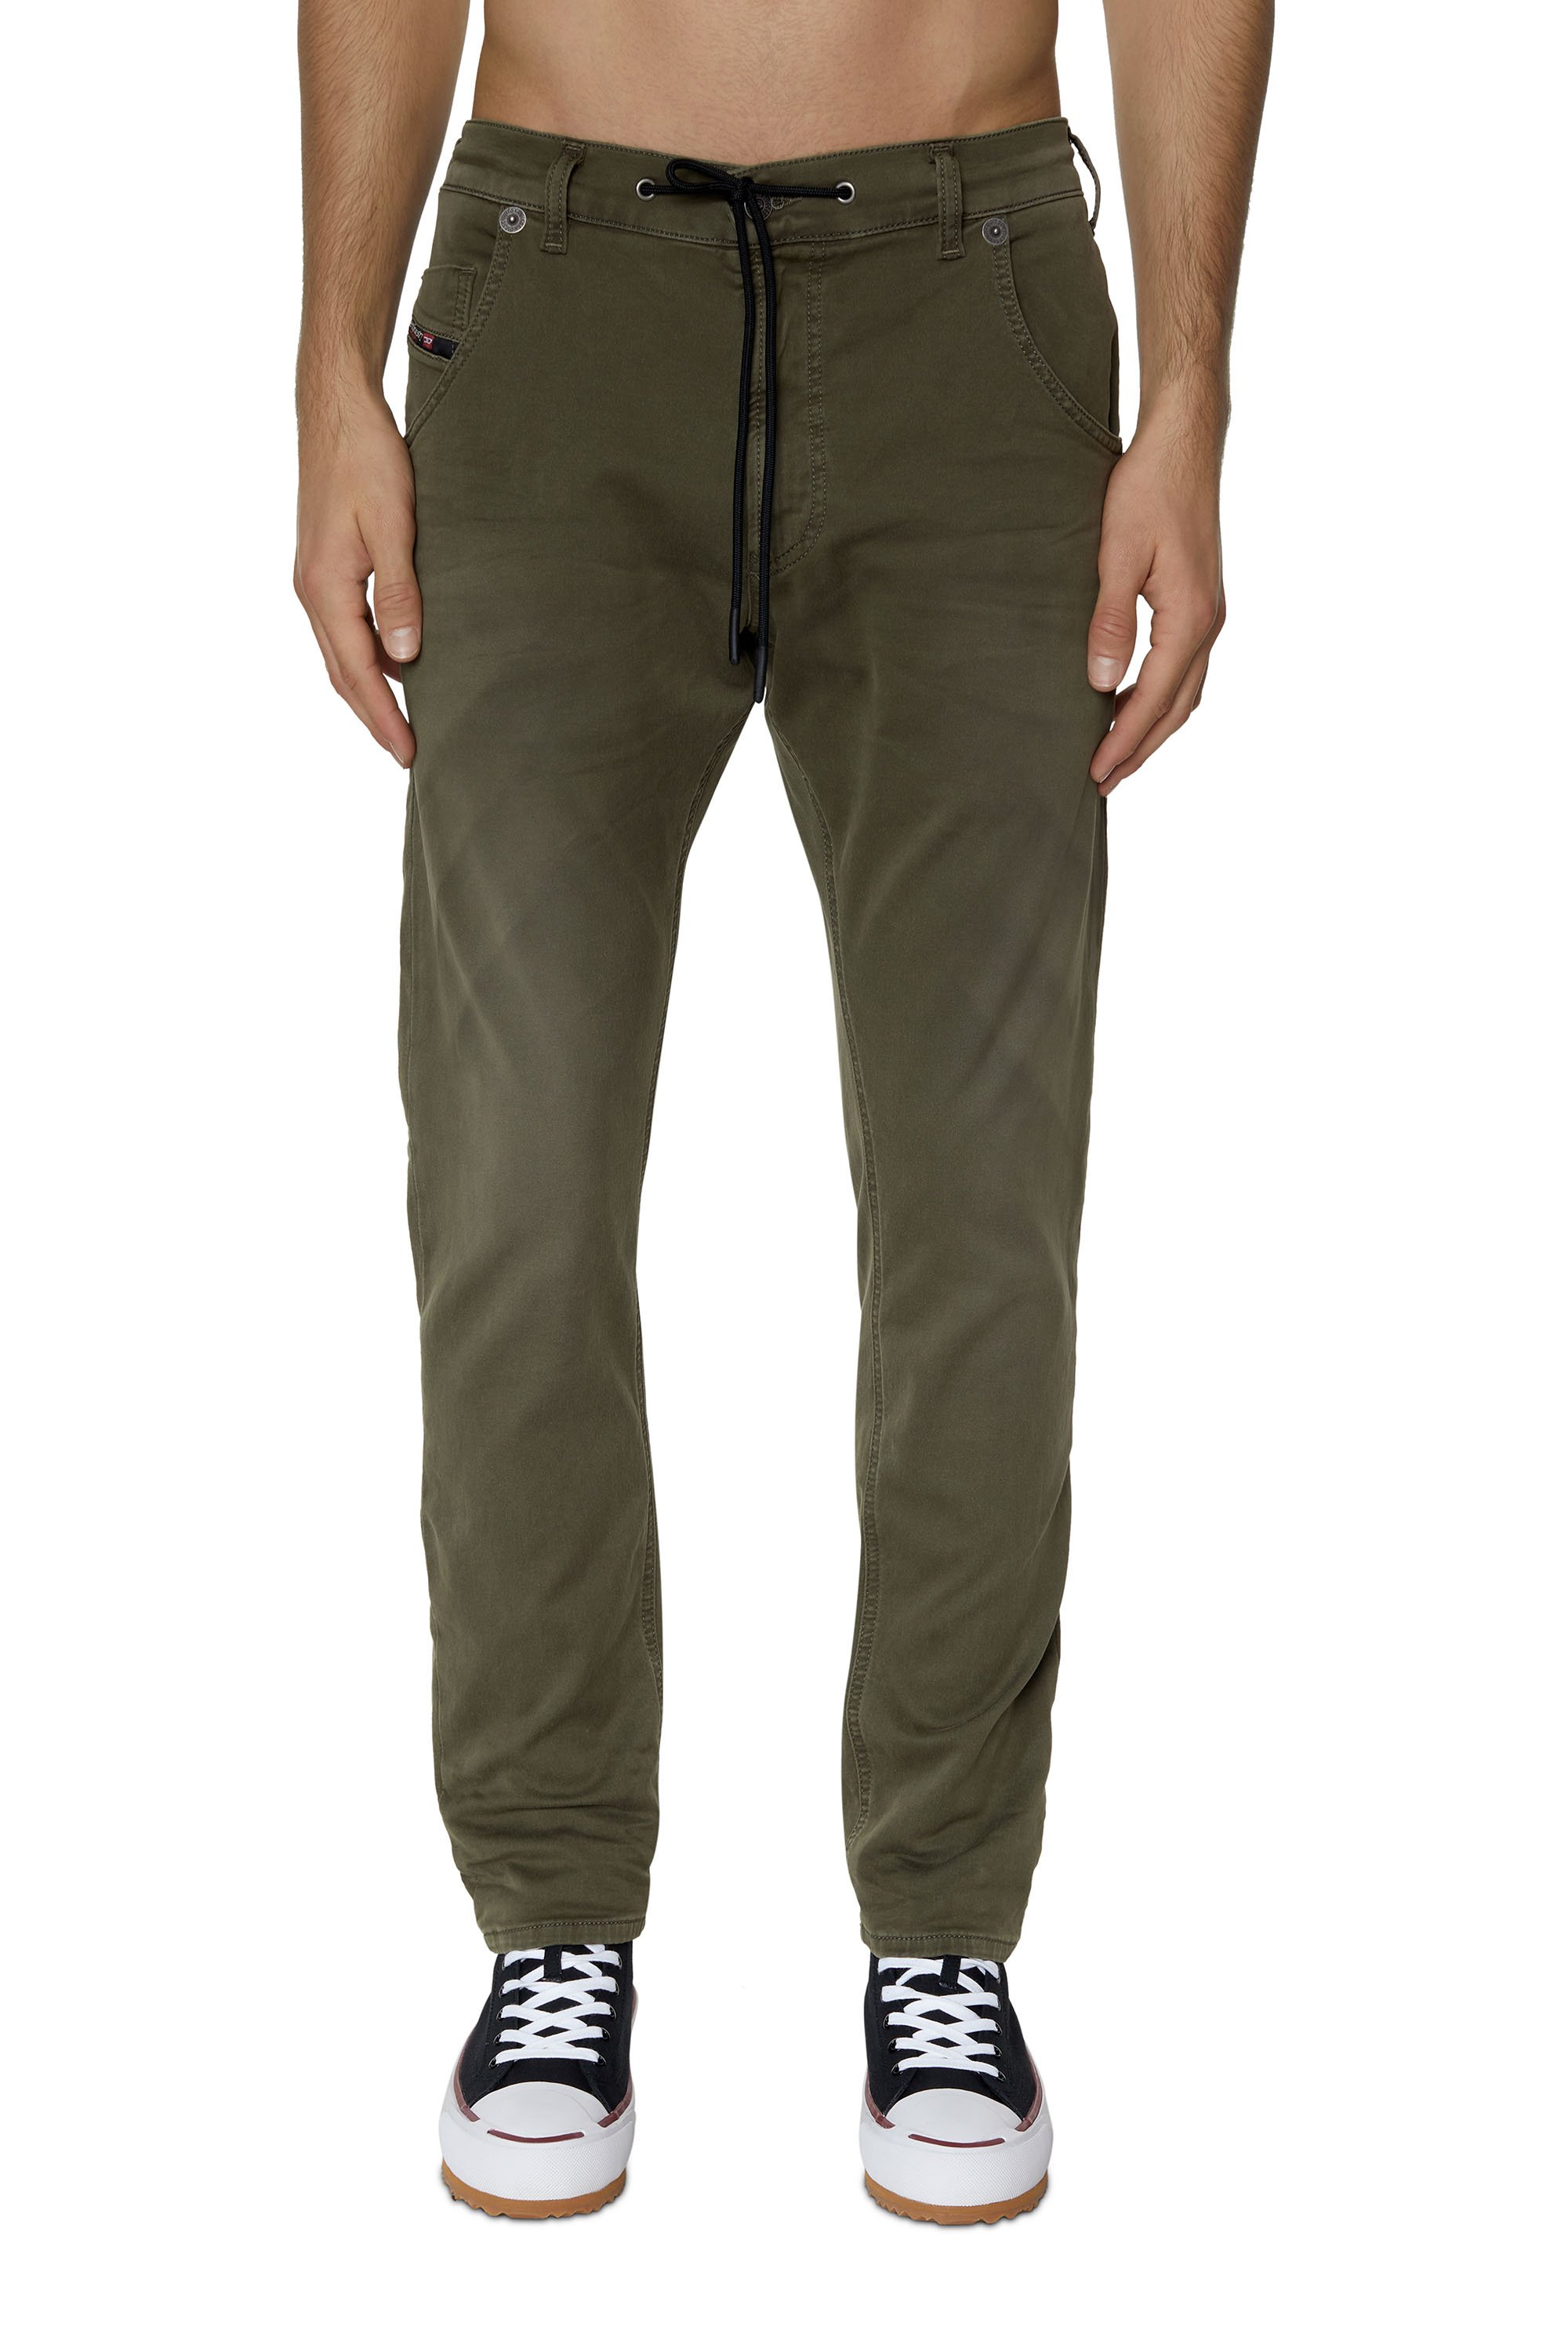 Krooley JoggJeans® 0670M Tapered, Military Green - Jeans